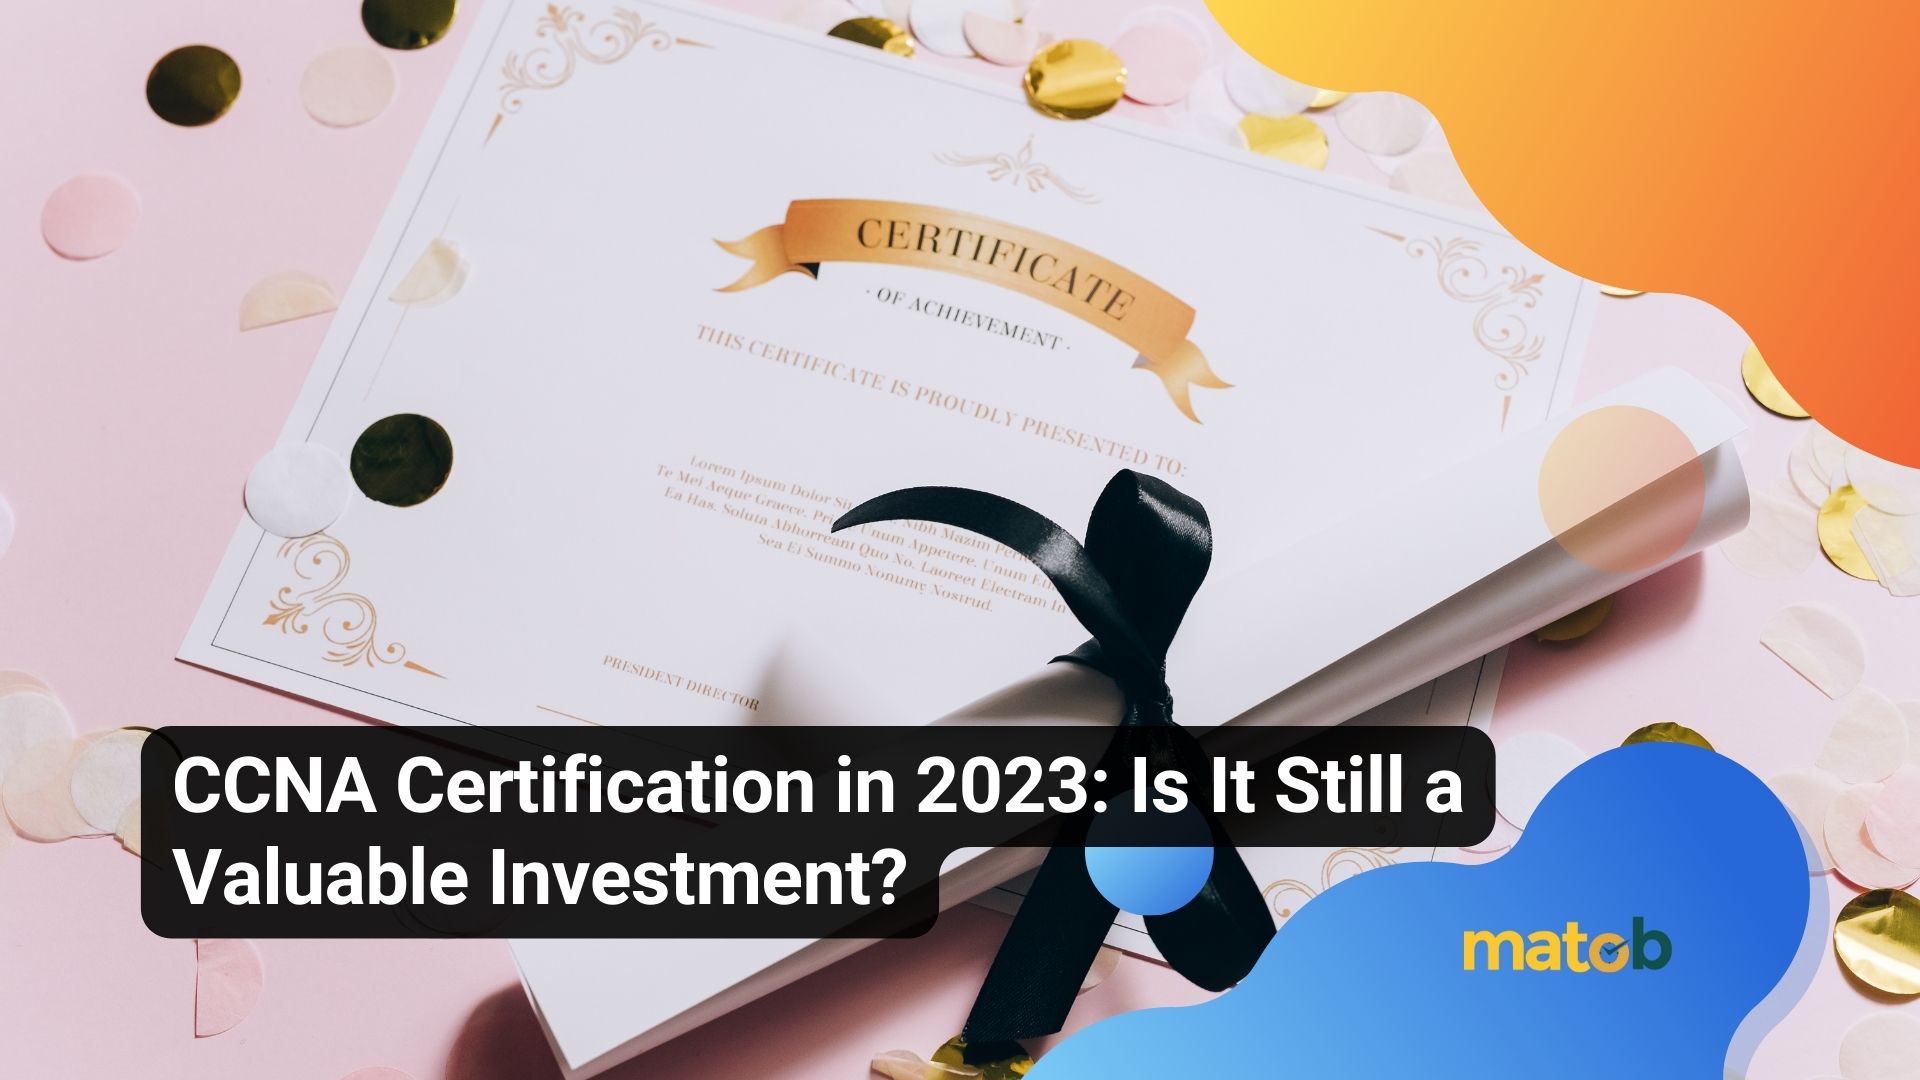 CCNA Certification in 2023: Is It Still a Valuable Investment?